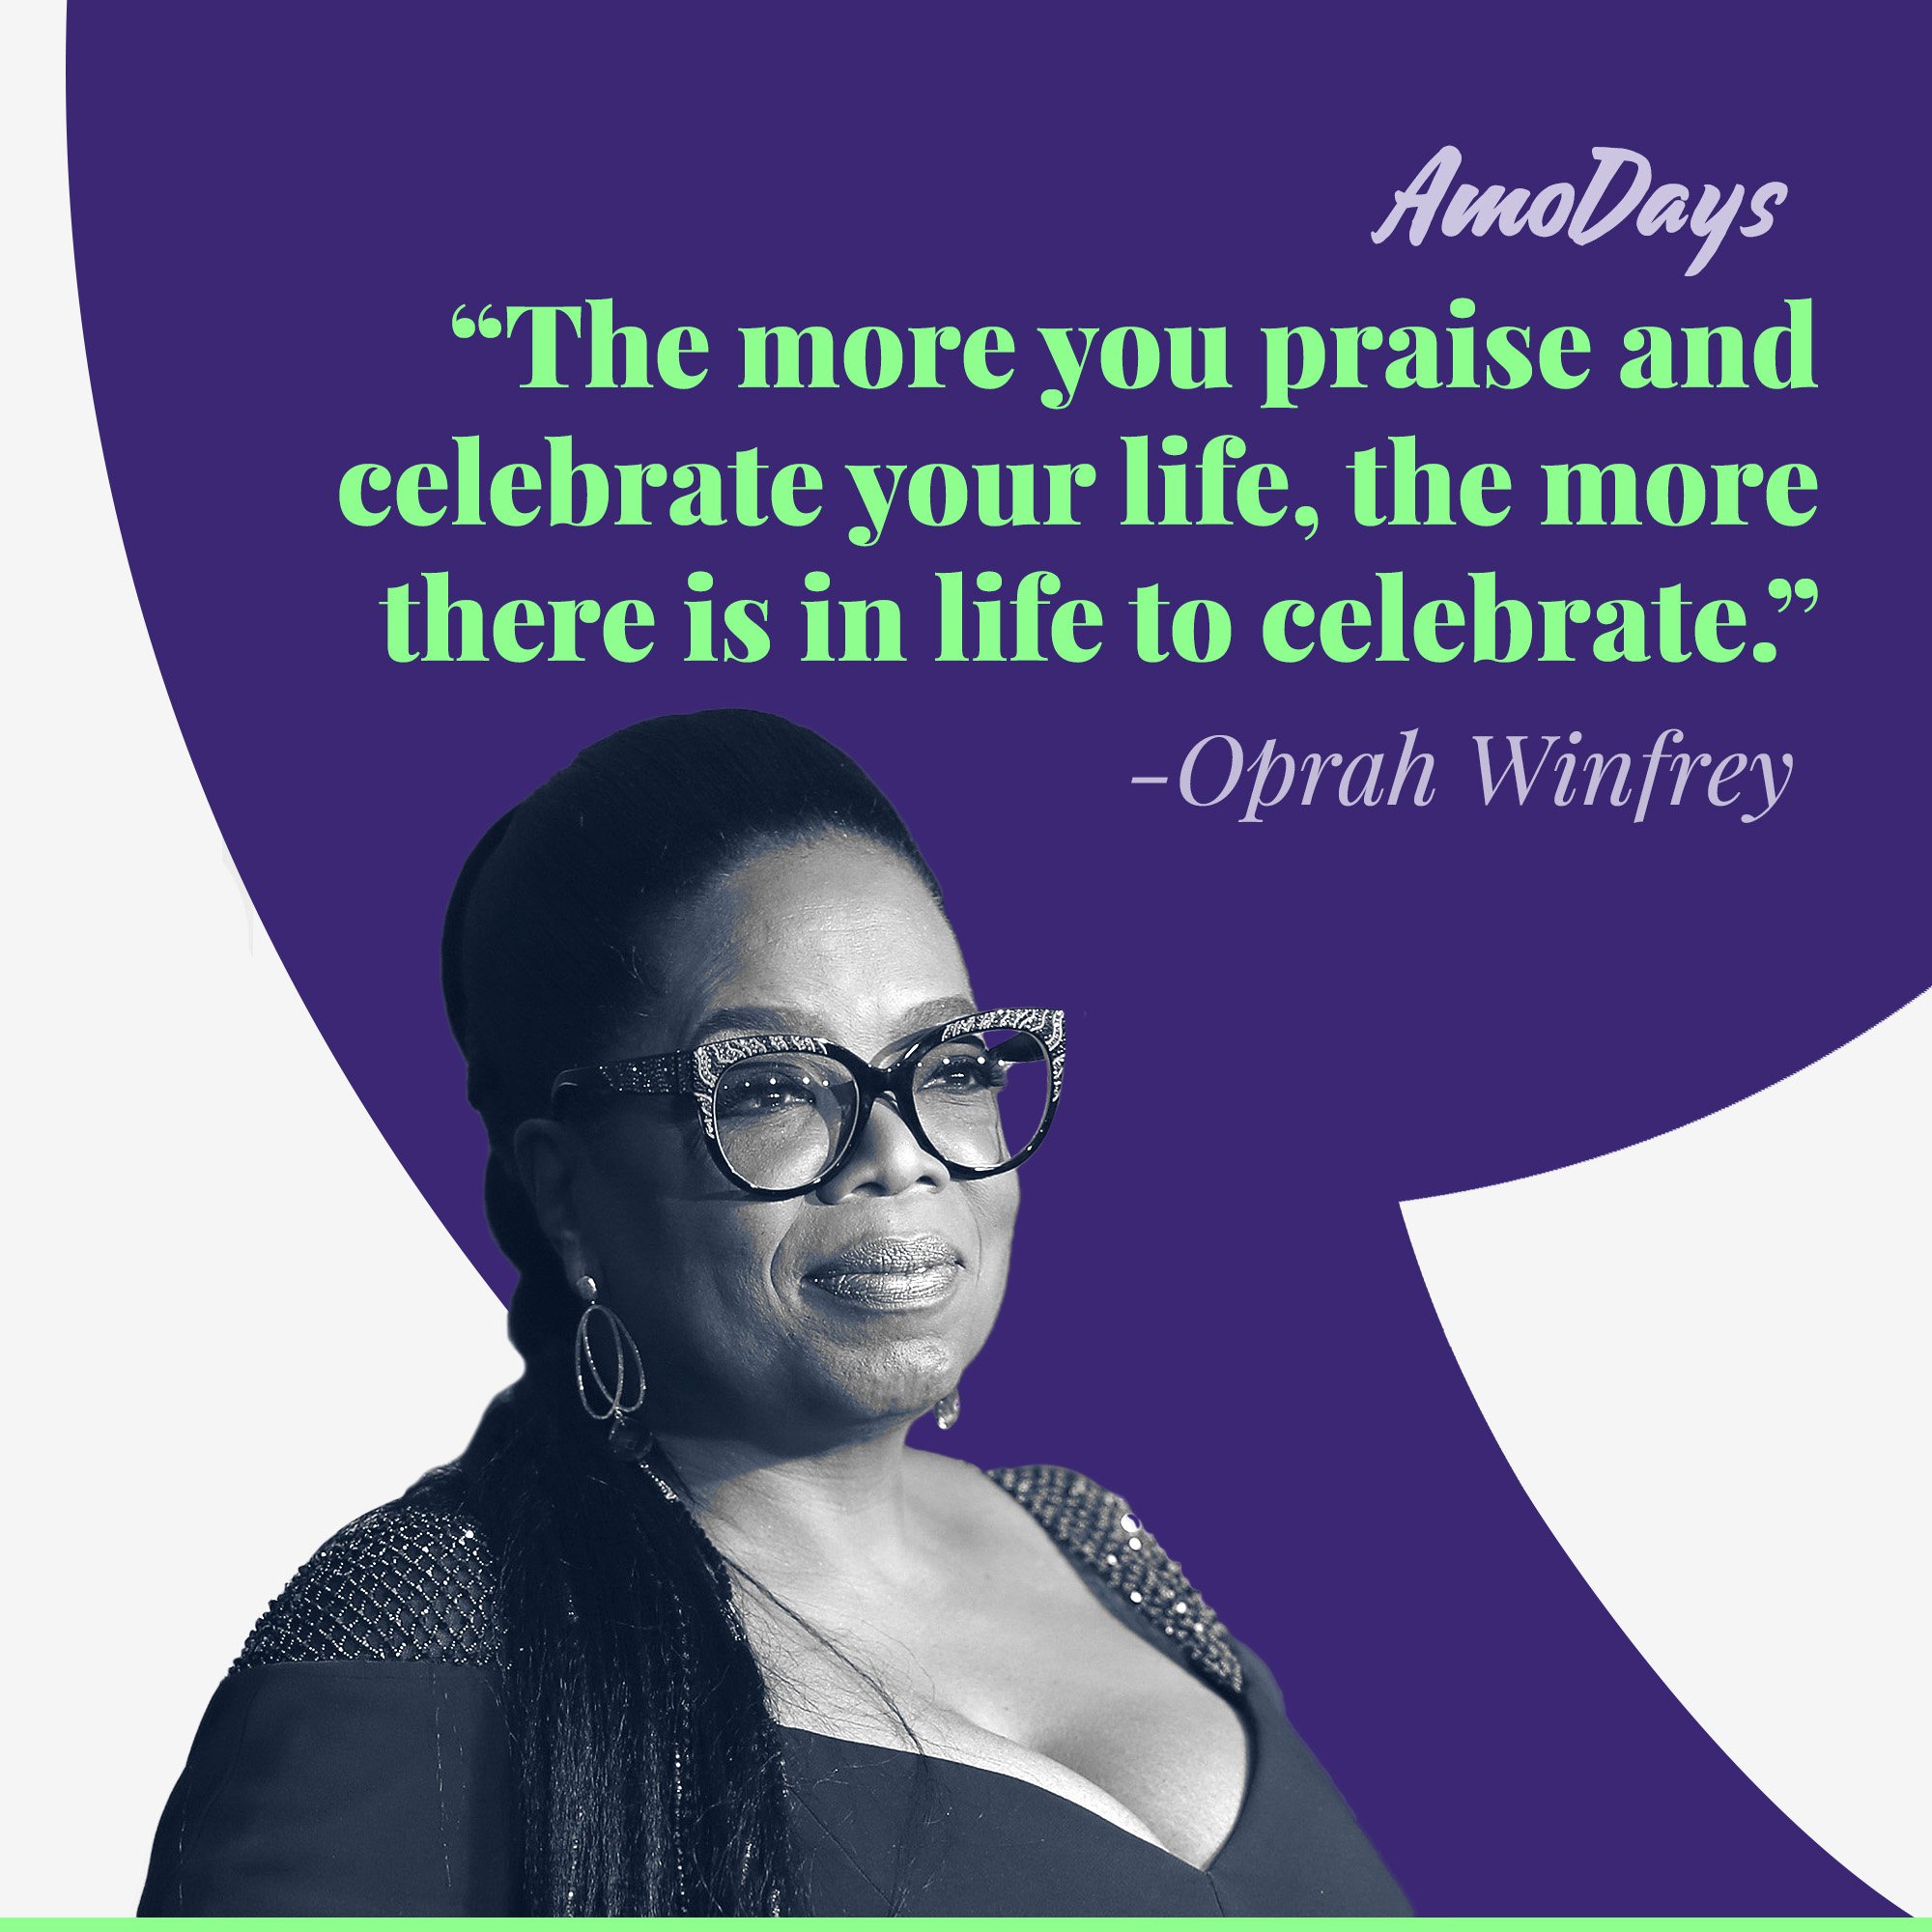 Oprah Winfrey's quote: "The more you praise and celebrate your life, the more there is in life to celebrate." | Image: AmoDays